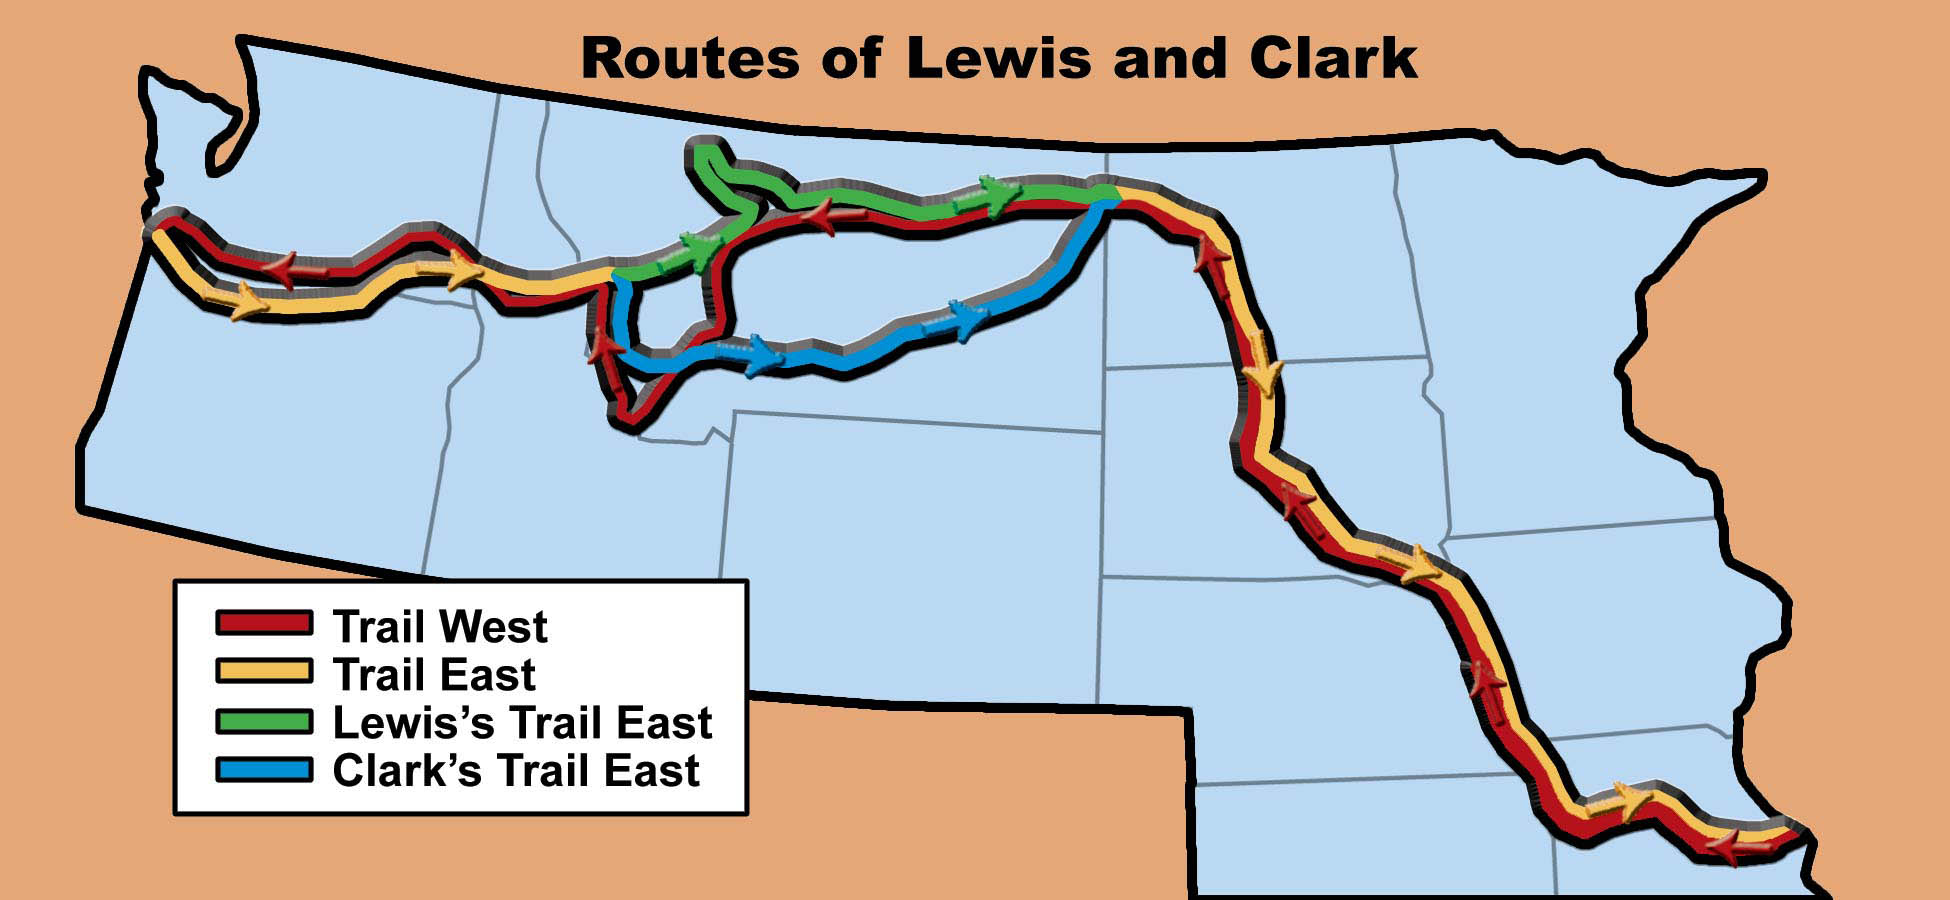 The routes taken by the Lewis and Clark Expedition